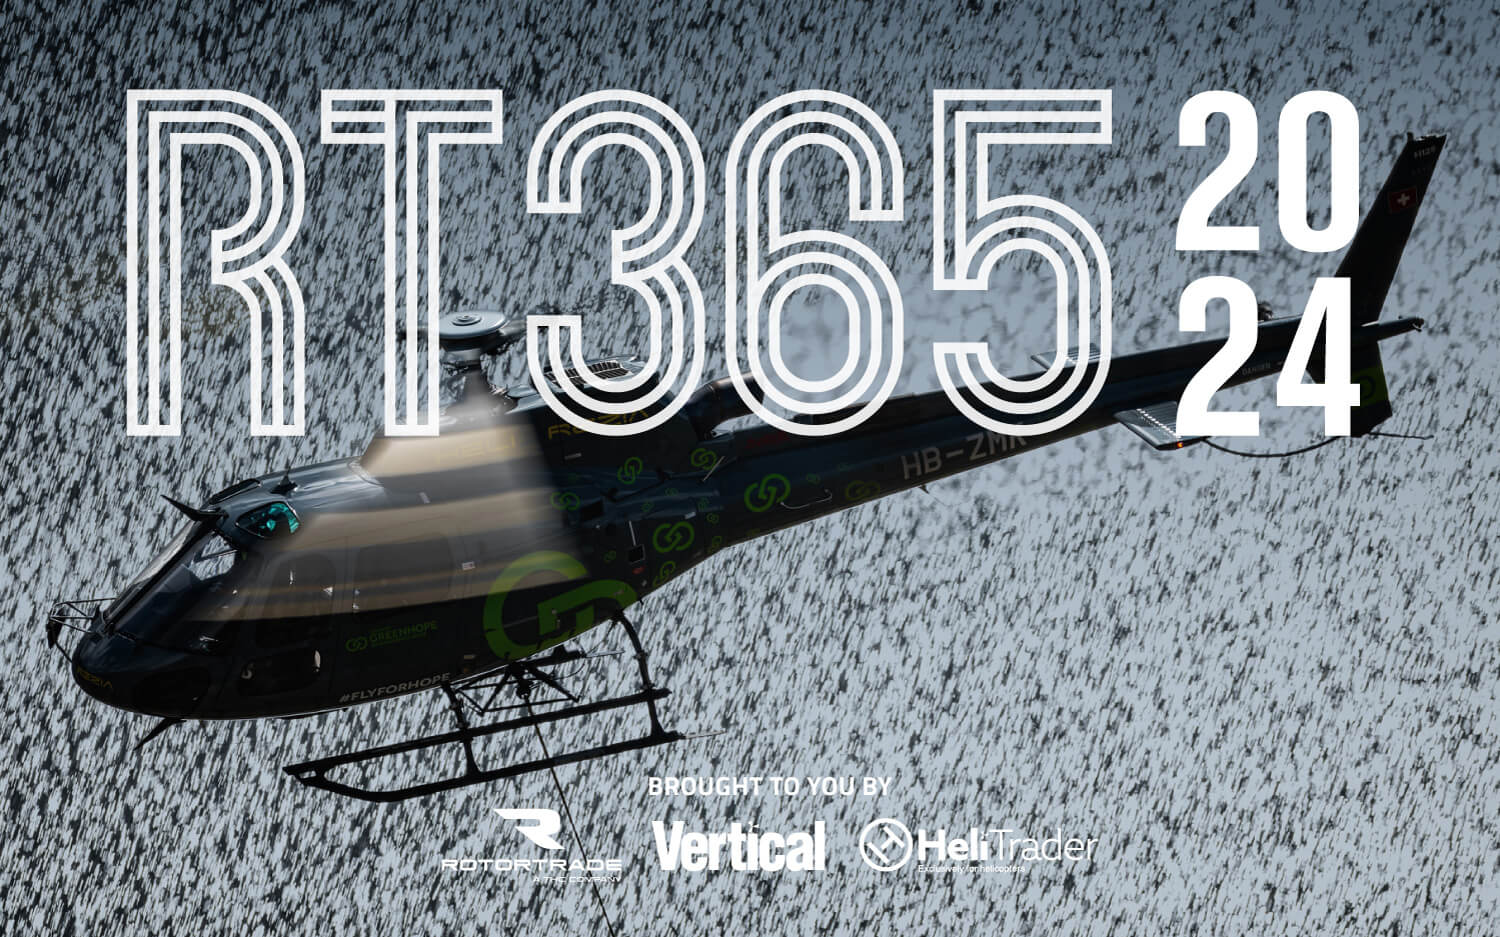 ROTORTRADE and Vertical unveil RT365 Helicopter Market Report 2024